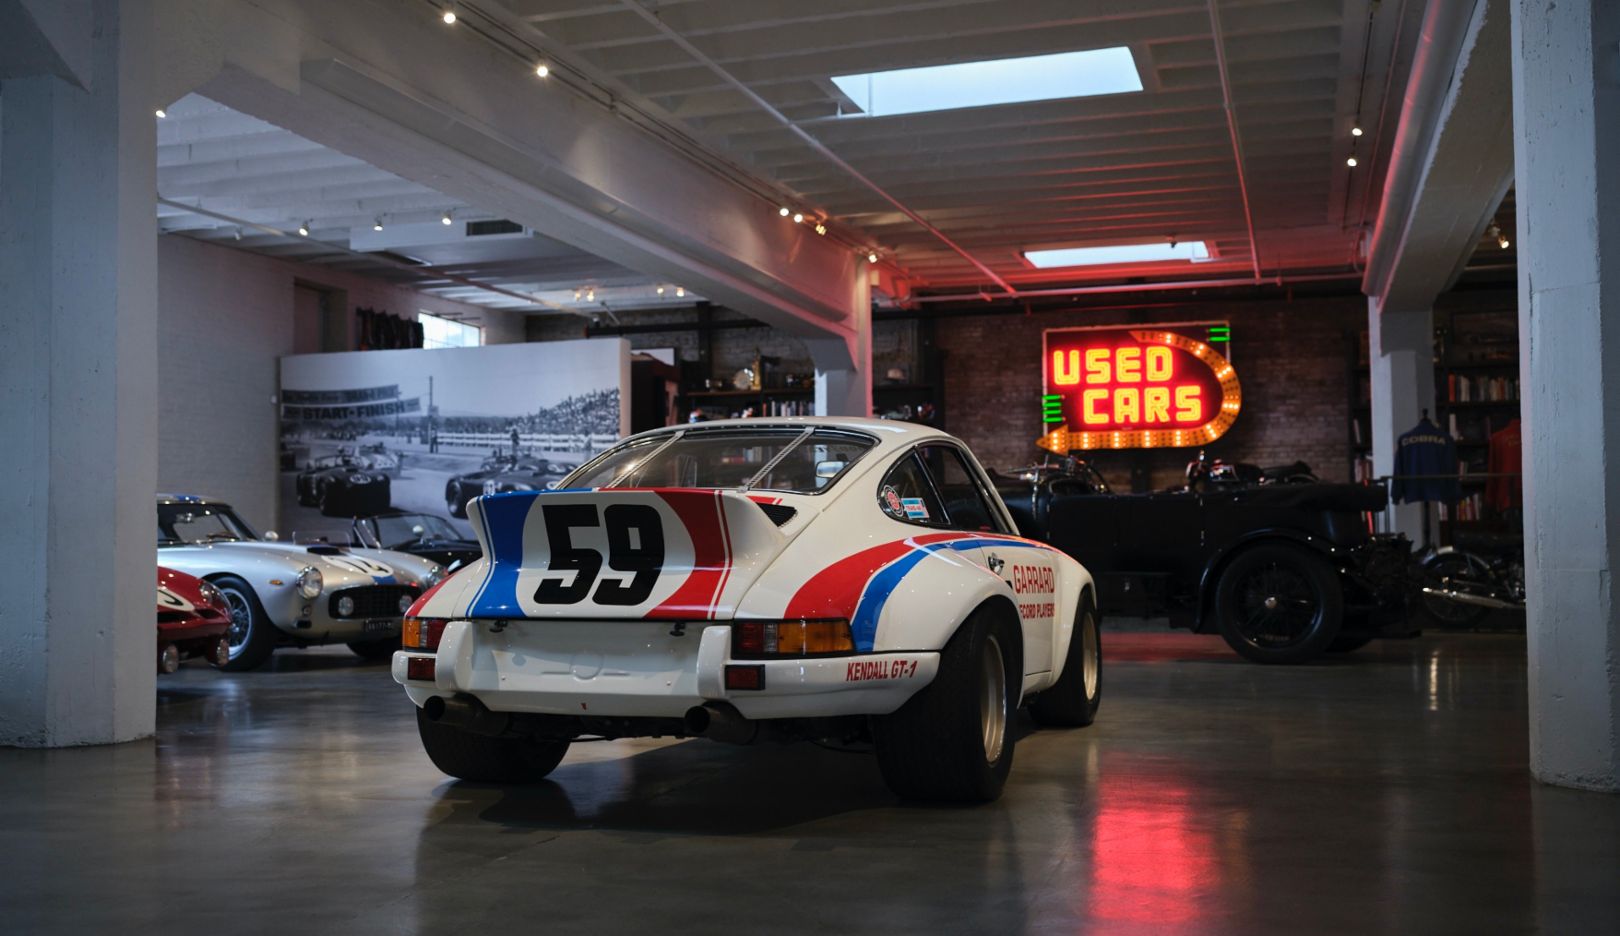 A 911 Carrera RSR 2.8 can also be found in Meyer’s garage.